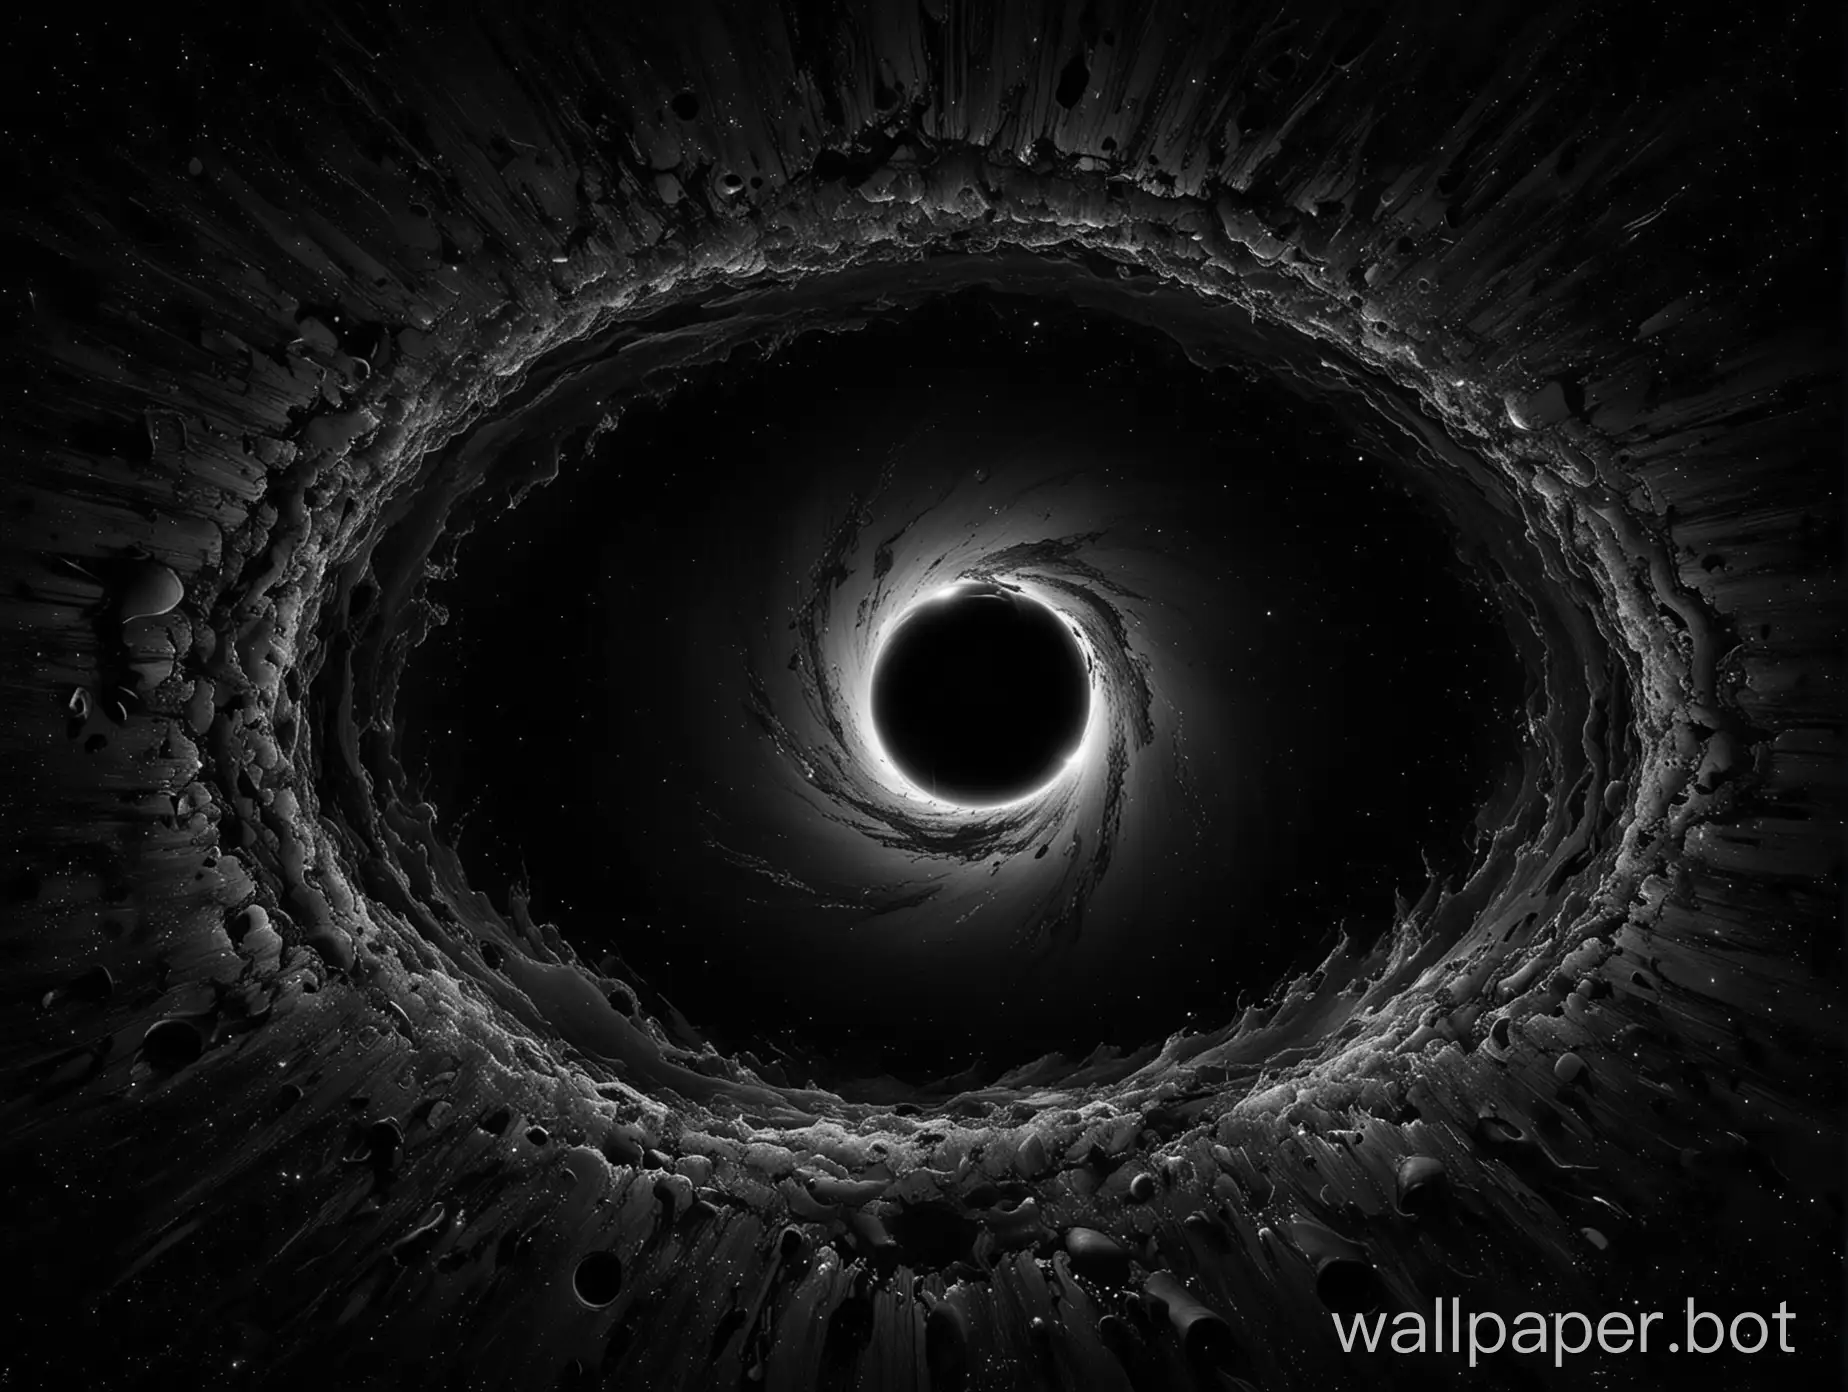 An incredibly detailed and high-resolution 4K wallpaper, showcasing a breathtaking view of a black hole. The background is a seamless, blank canvas of midnight-black, with only a hint of light peeking through from the edges. The black hole itself is the centerpiece of the image, its massive, swirling vortex of pure darkness contrasting sharply against the otherwise empty expanse of space. The photo is expertly composed, capturing the epic scale and awe-inspiring beauty of this cosmic phenomenon. The lighting is subtle, adding depth and dimension to the image, as if the viewer is peering into the depths of the universe itself. The colors are kept to a minimum, with a little bit of brightness added to accentuate the details of the black hole, while maintaining the overall simple color palette of black and white. The image is perfectly framed, allowing the viewer to lose themselves in the endless abyss of the black hole, feeling both small and insignificant, yet also connected to something much greater than themselves.